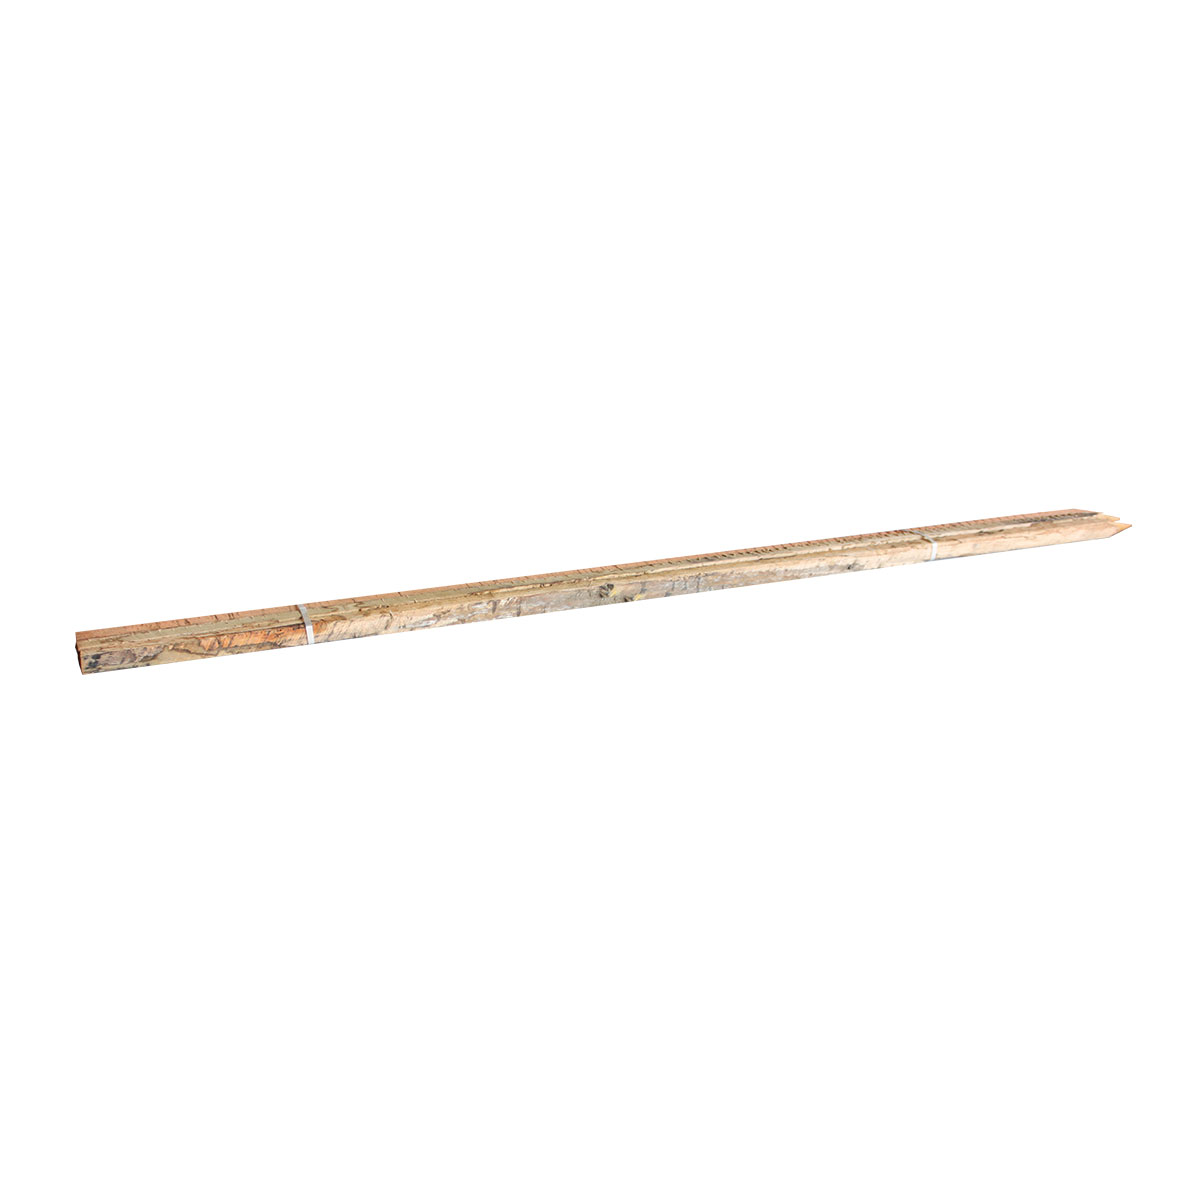 Hardwood Stakes 38 x 38 x 2400mm - 3 Pack